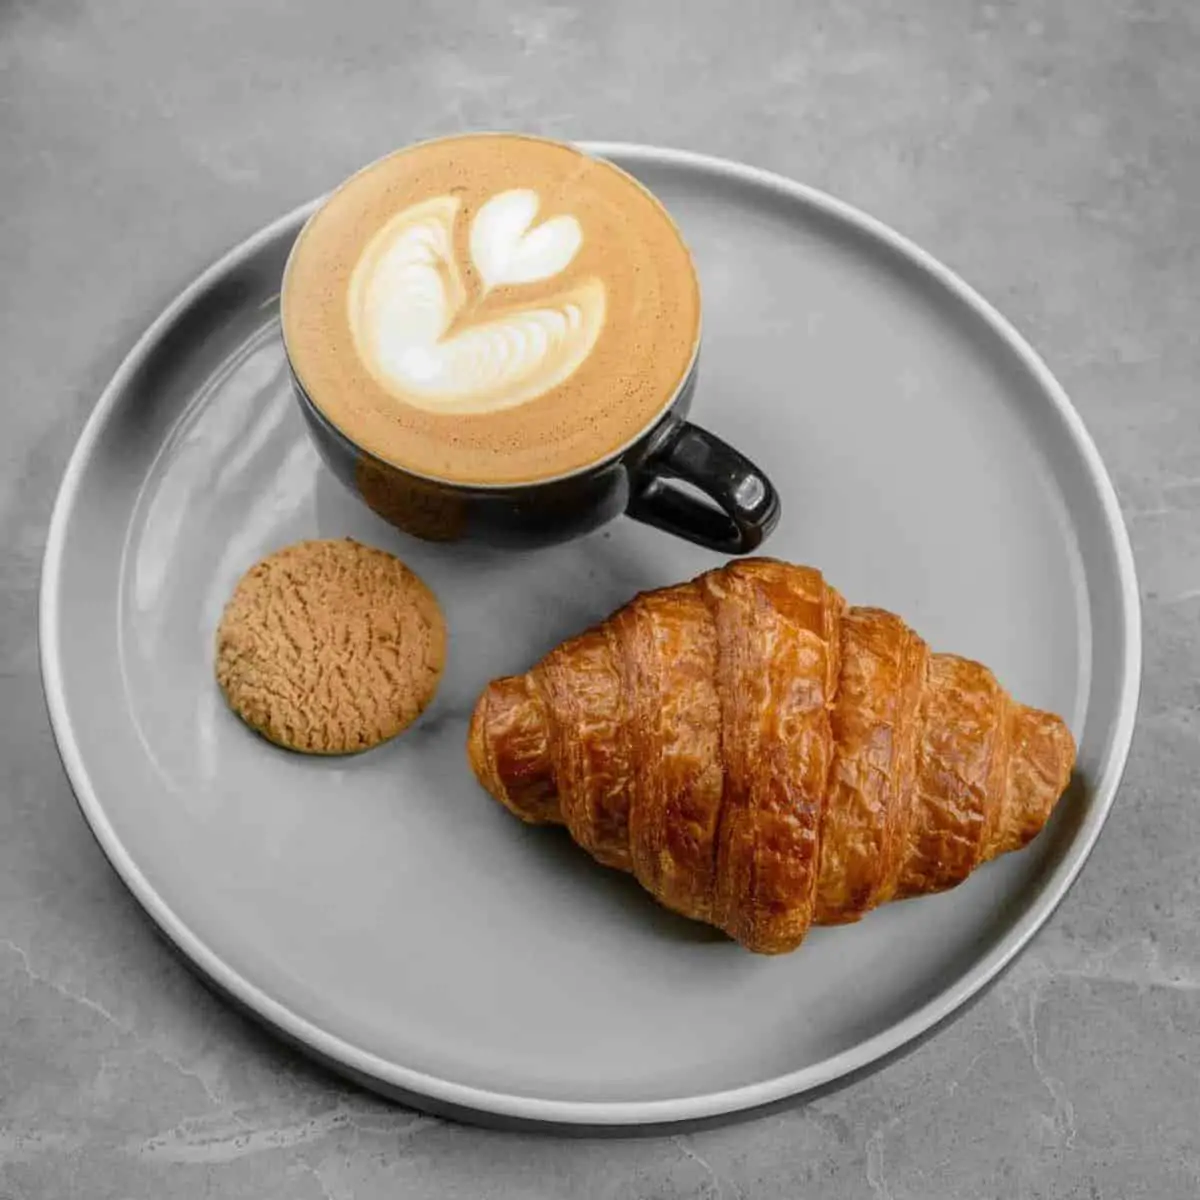 20 ml Coffee Hot latte and a butter croissant served on a gray plate